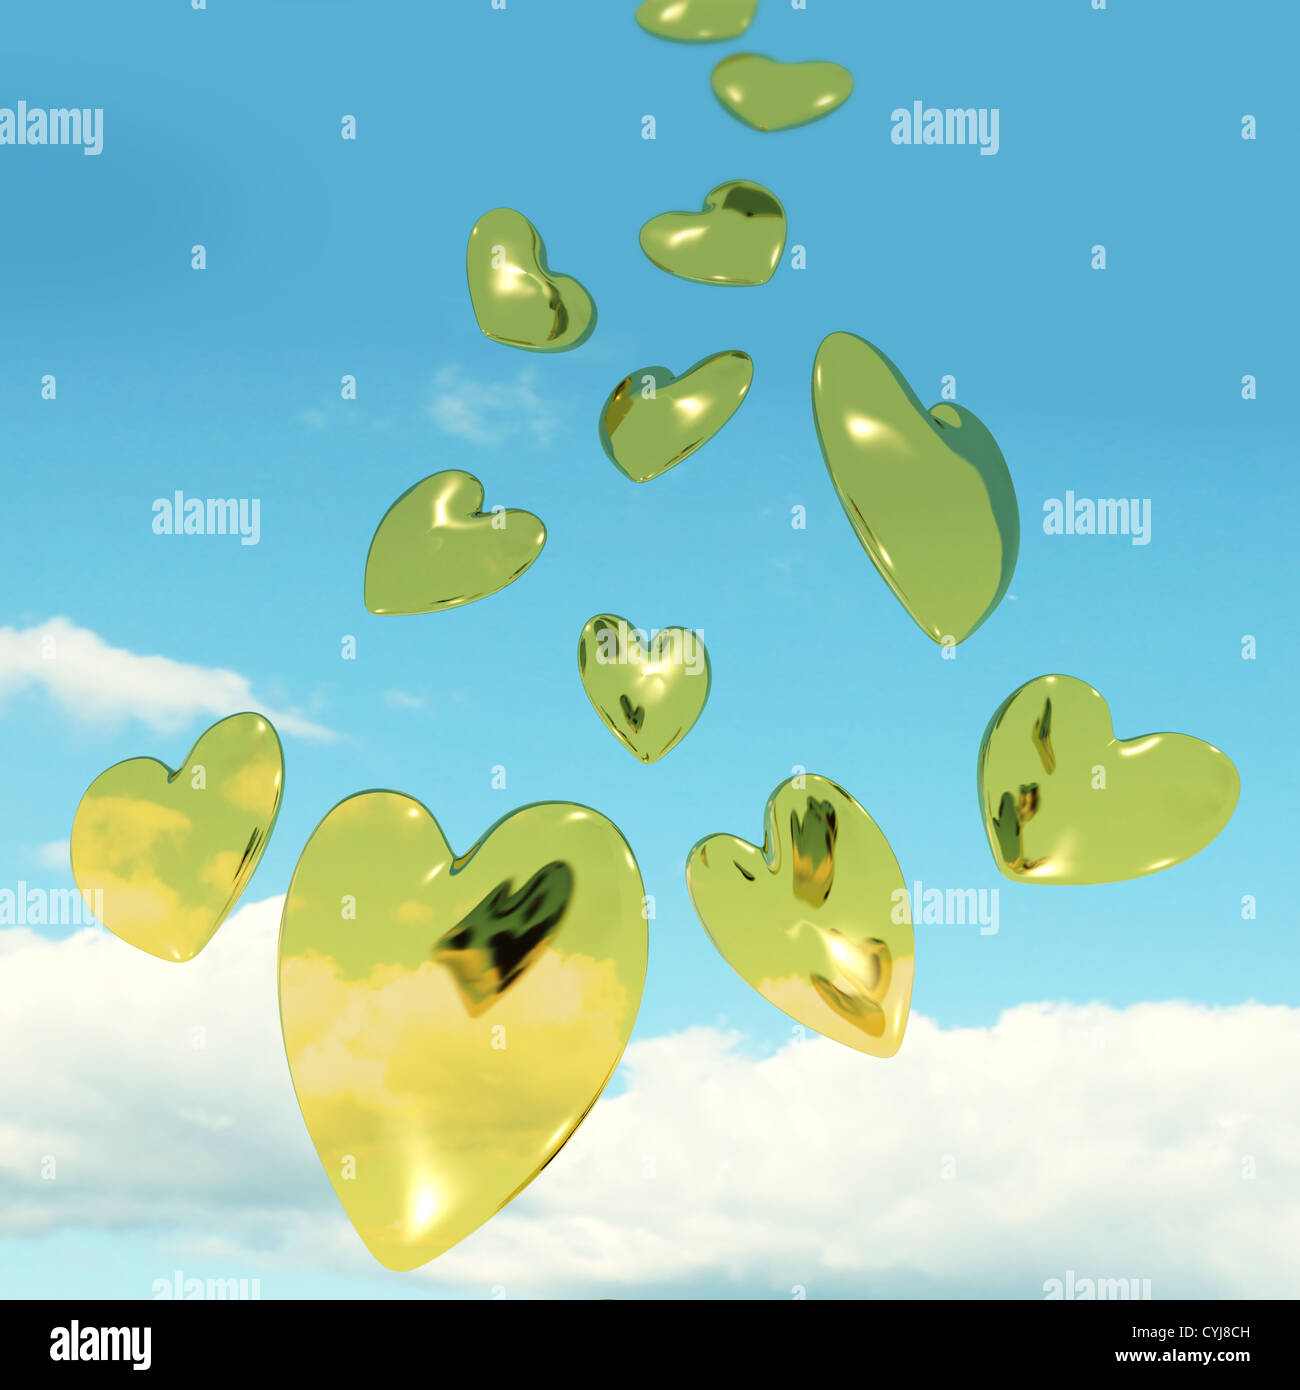 Metallic Gold Hearts Falling From The Sky Shows Love And Romance Stock Photo